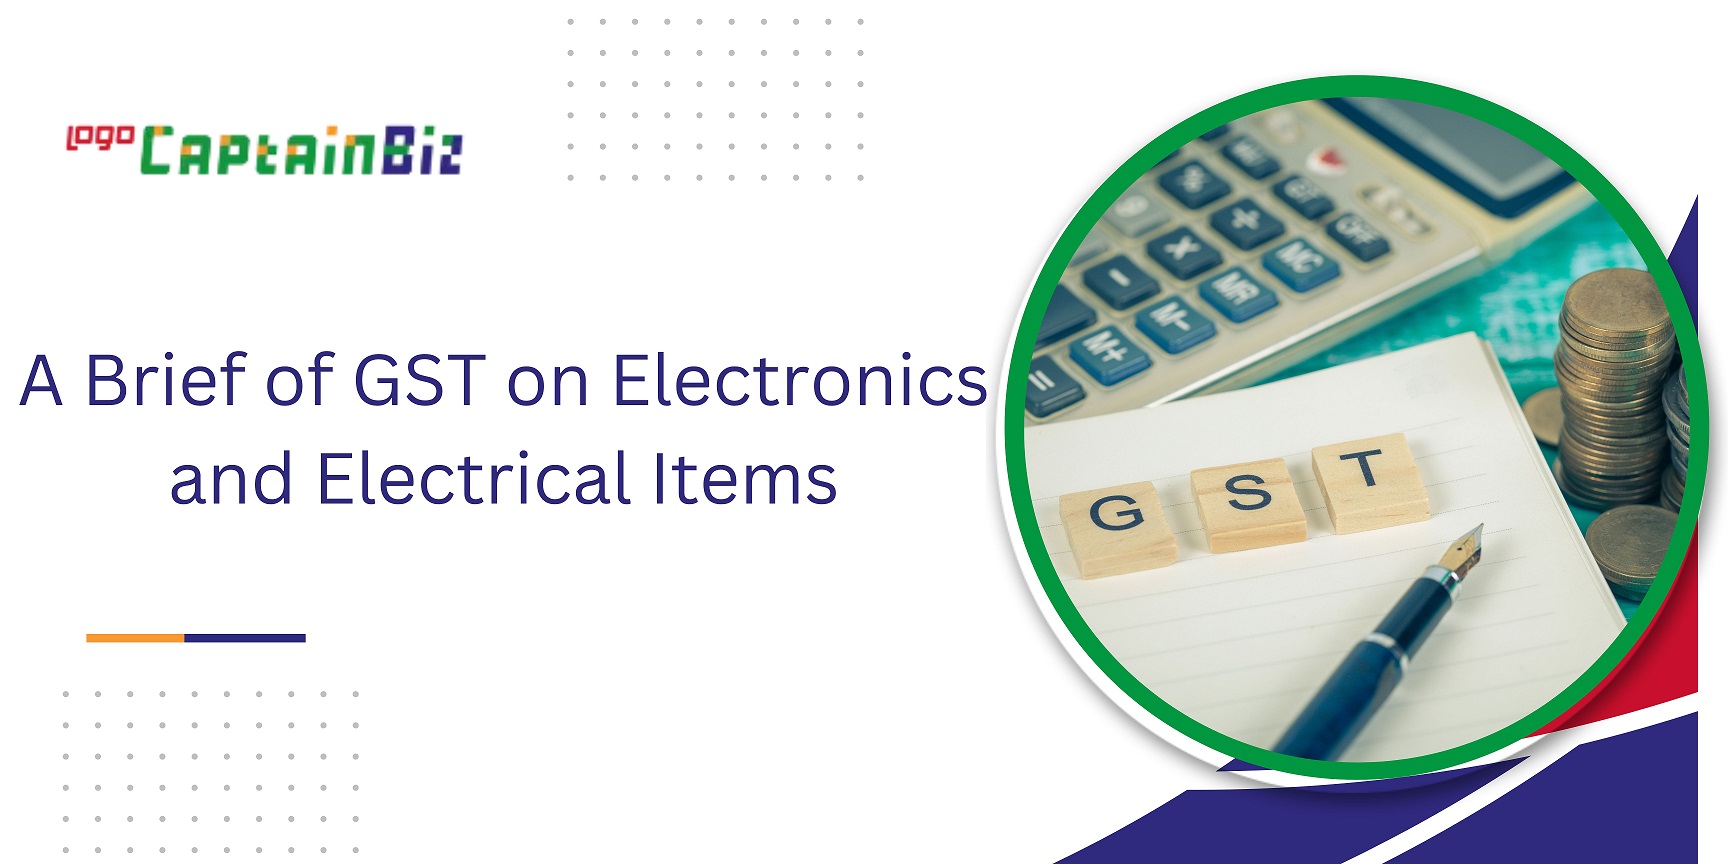 CaptainBiz: A Brief of GST on Electronics and Electrical Items